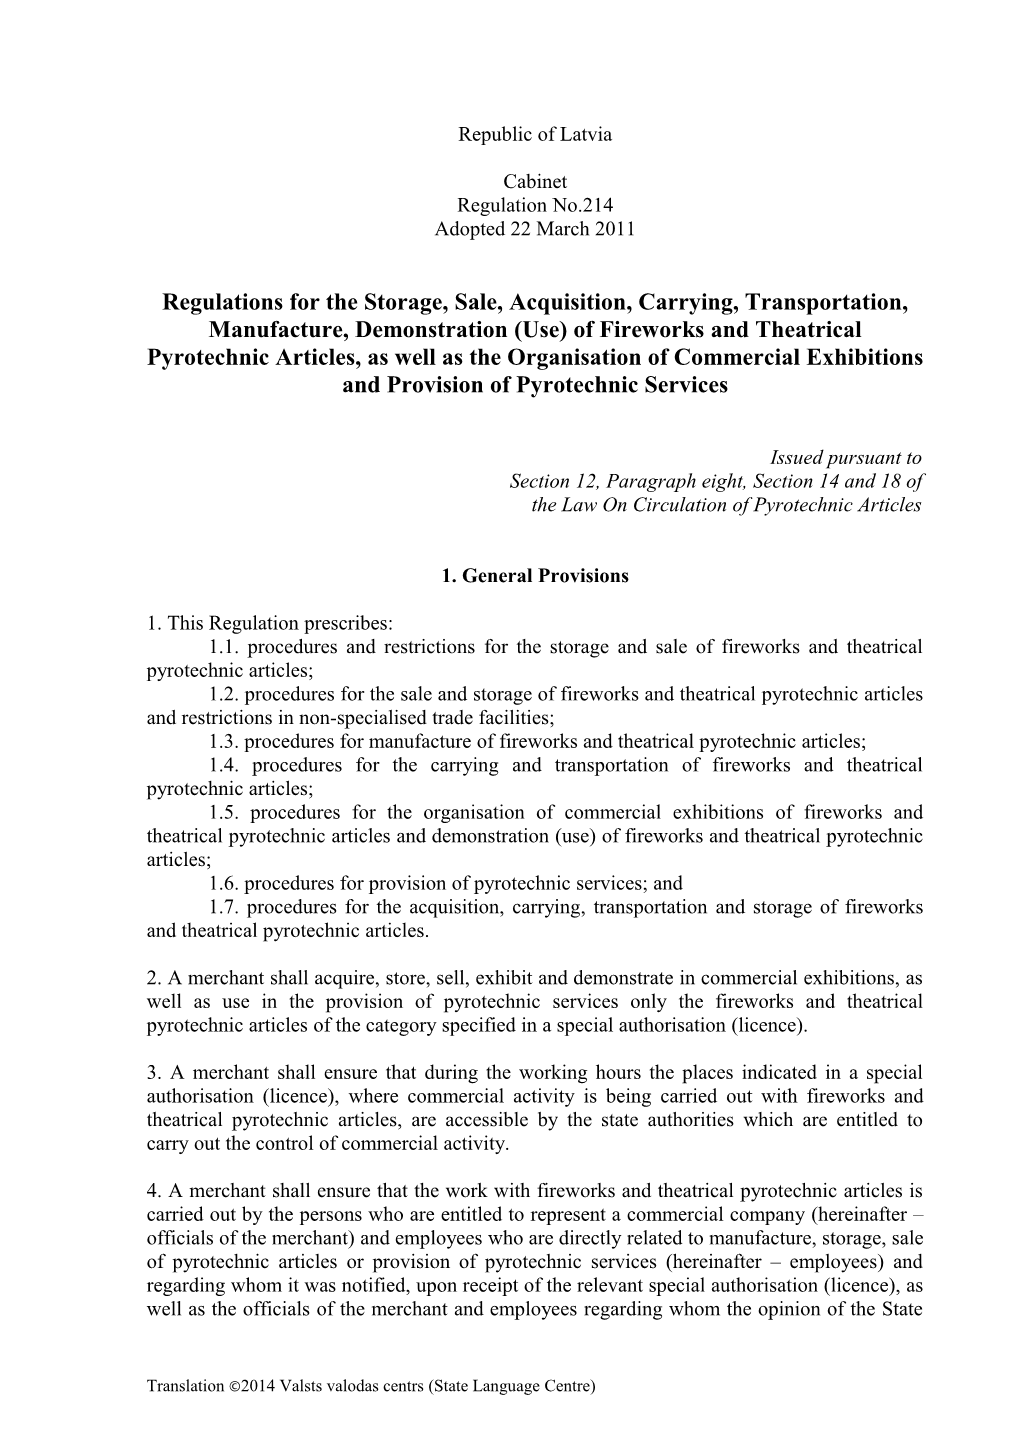 Regulations for the Storage, Sale, Acquisition, Carrying, Transportation, Manufacture